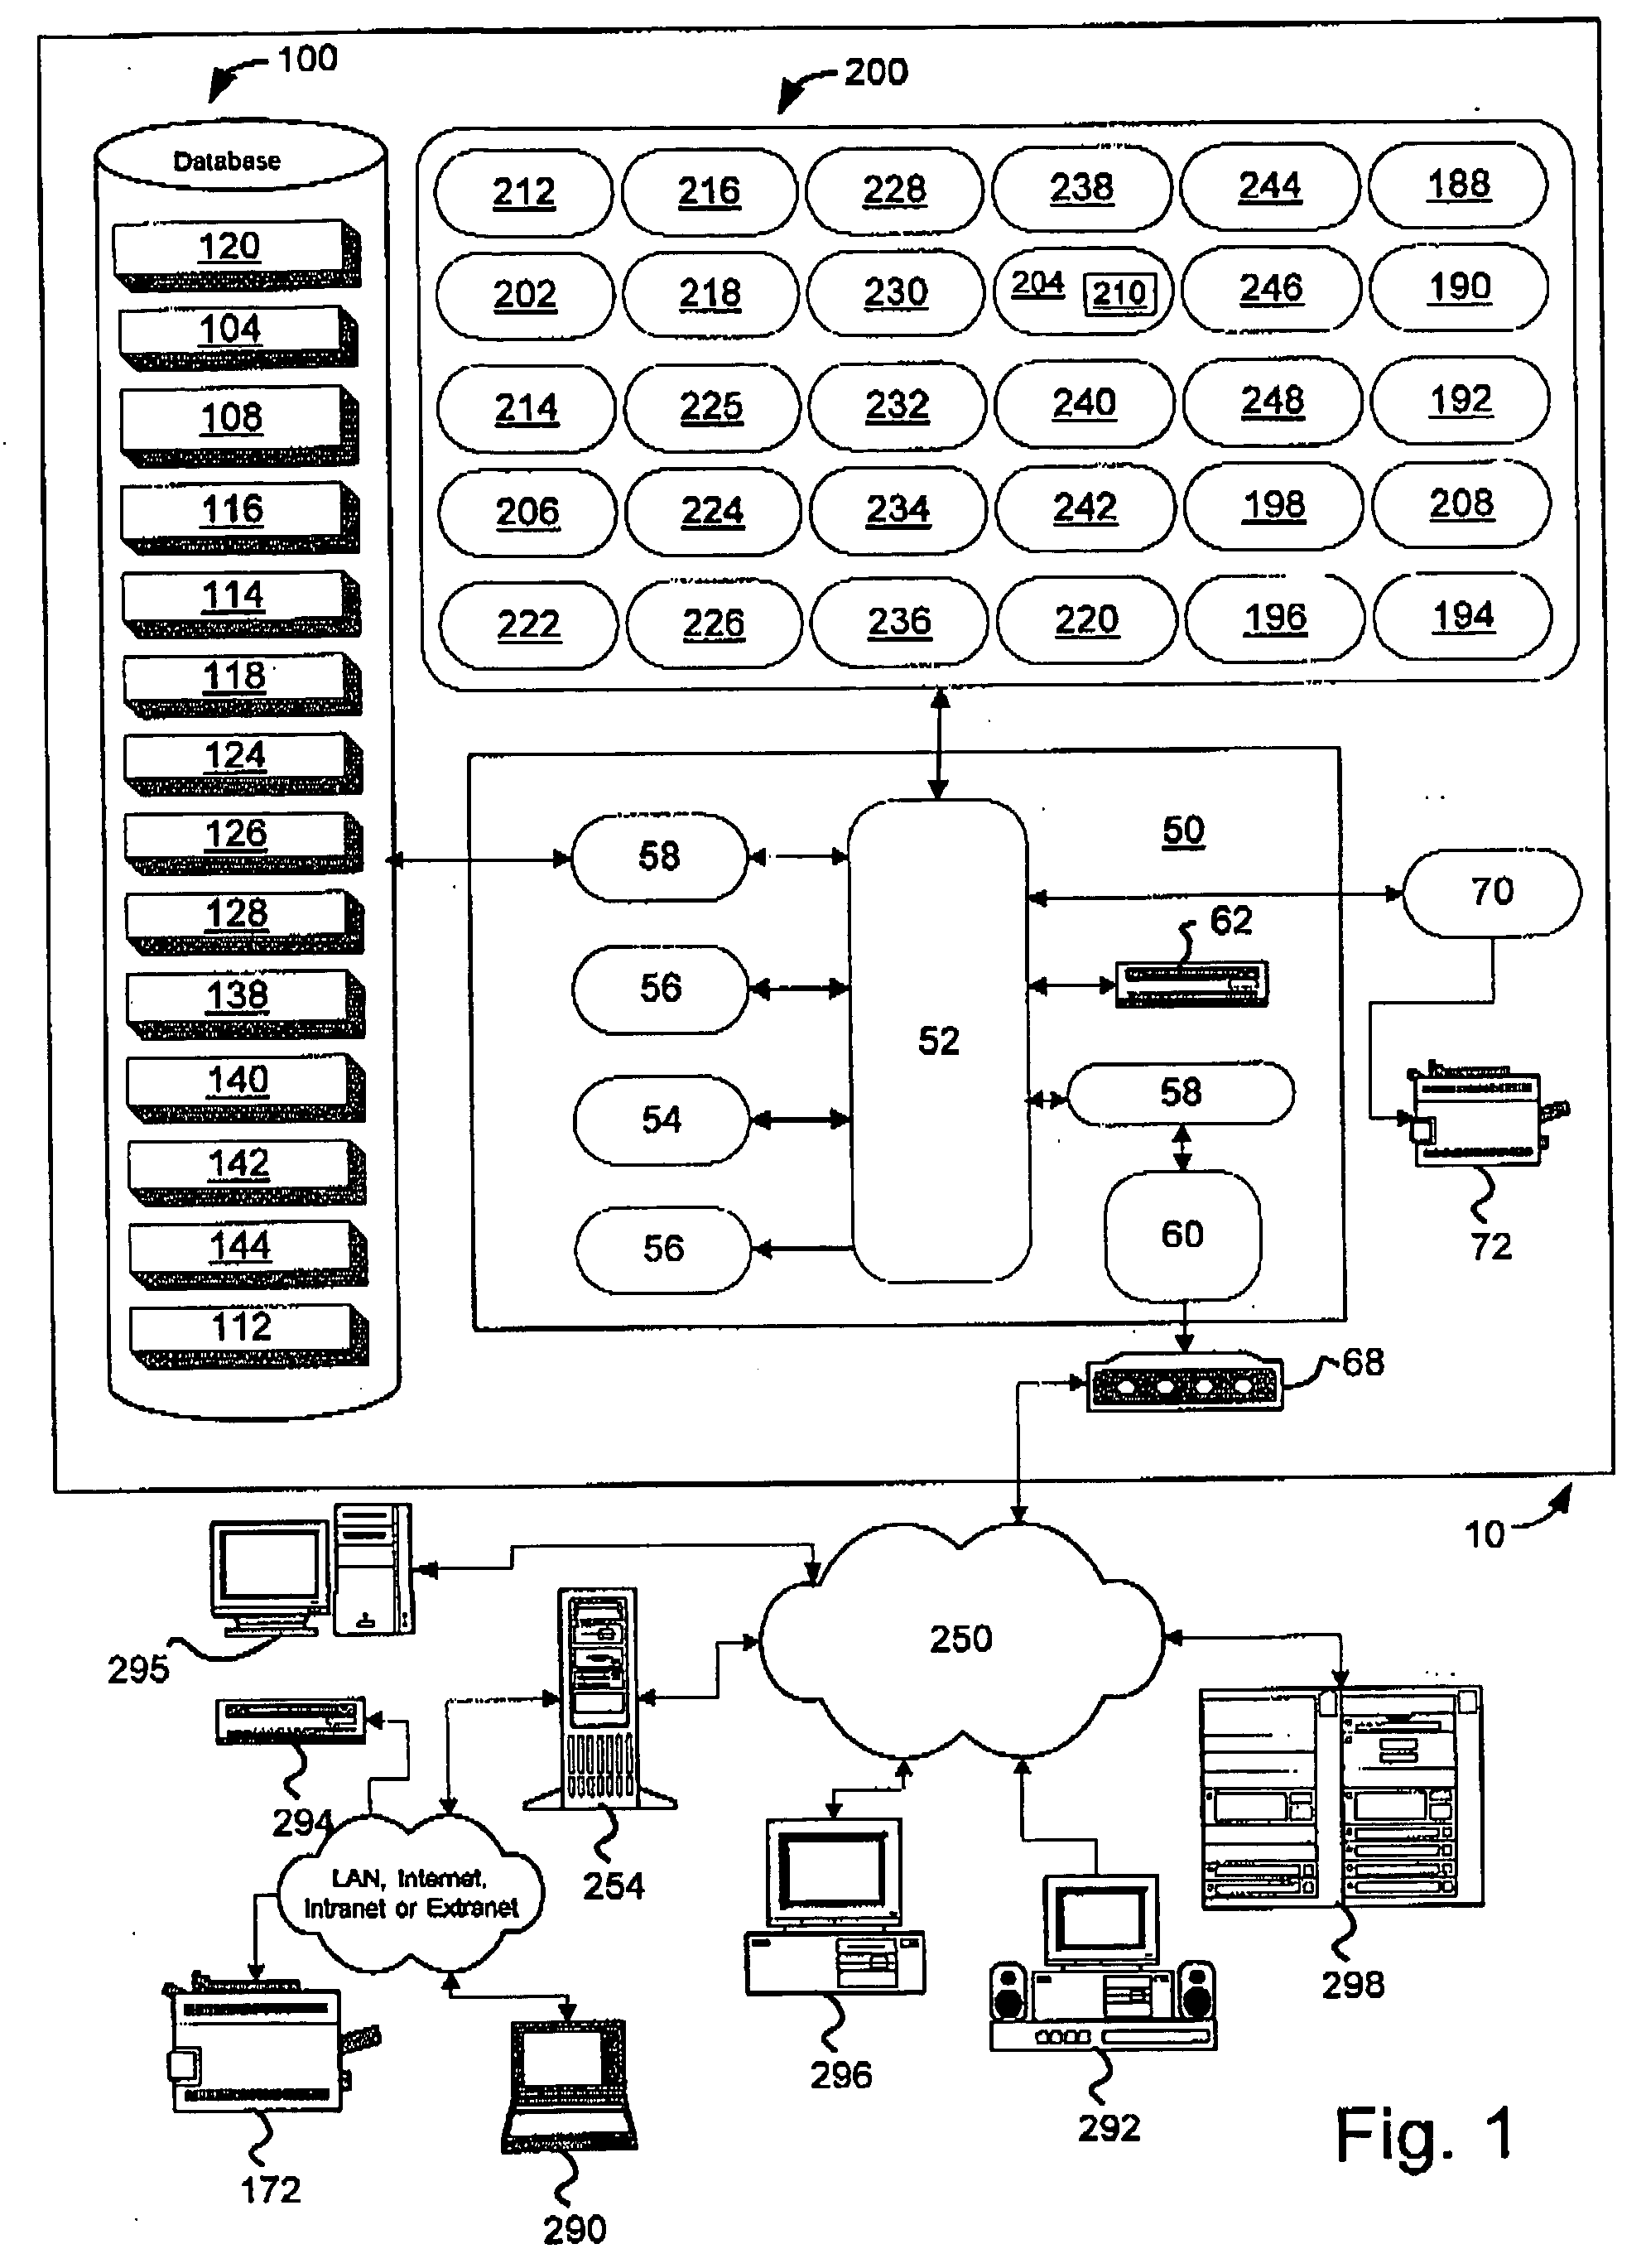 Timeshared electronic catalog system and method